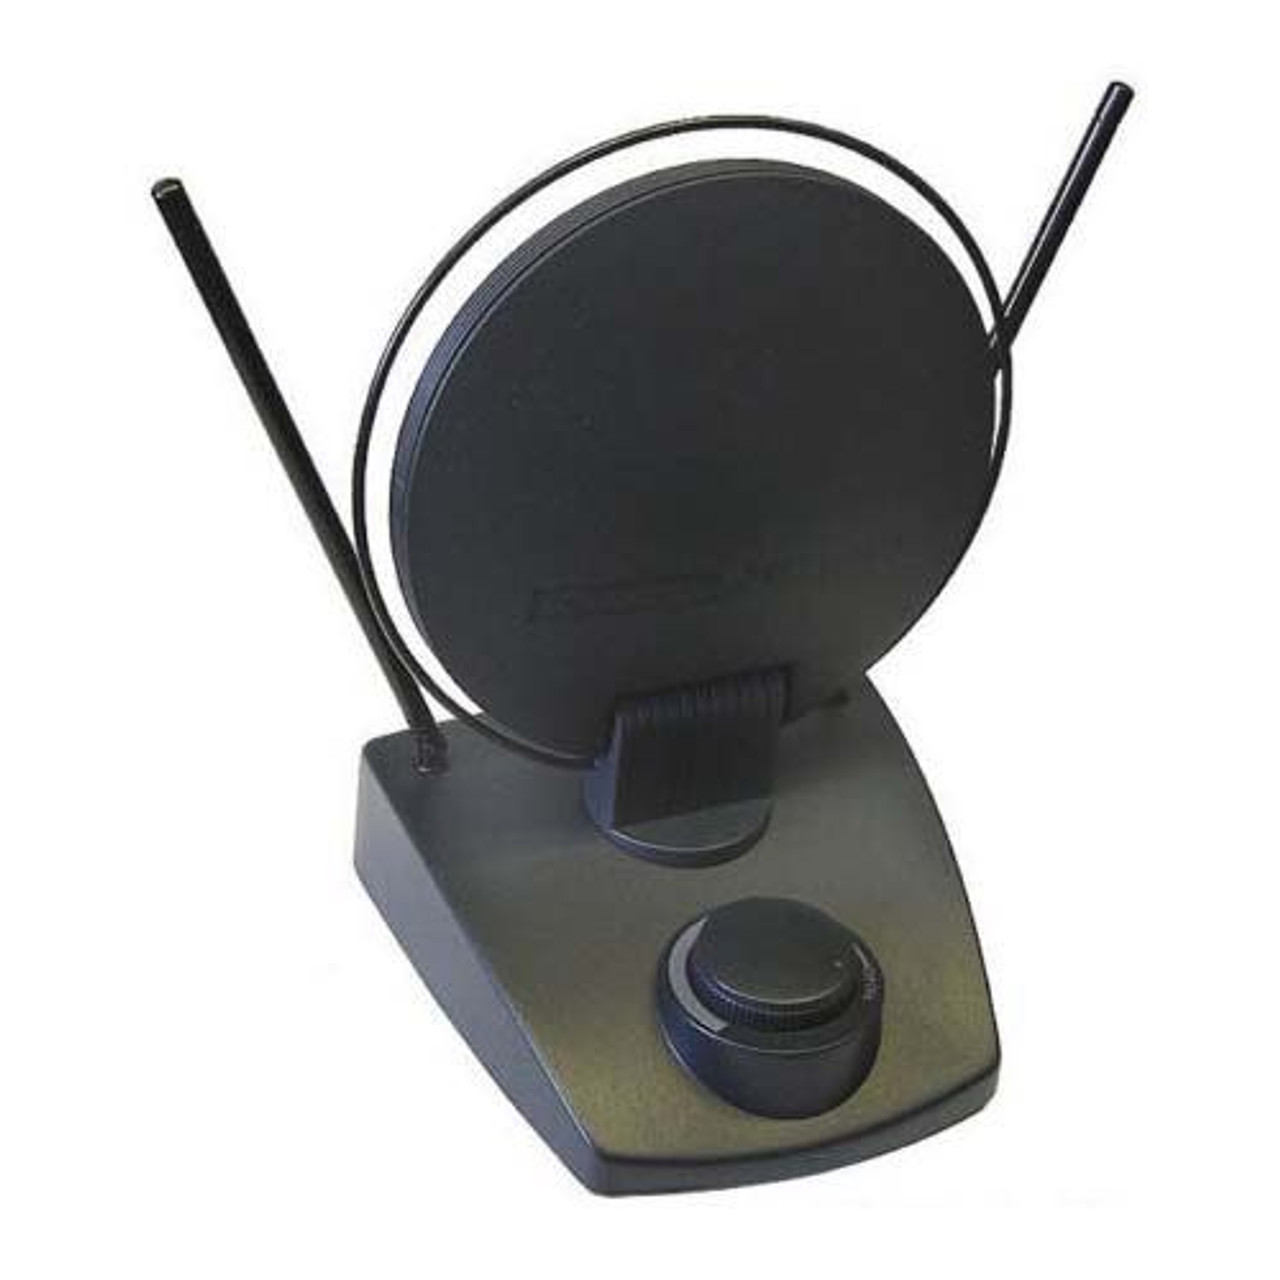 Summit  MANT-300 Indoor Amplified TV Antenna 30 dB Digital HDTV Aerial HDTV Local Signal Channels, Part # MANT-310